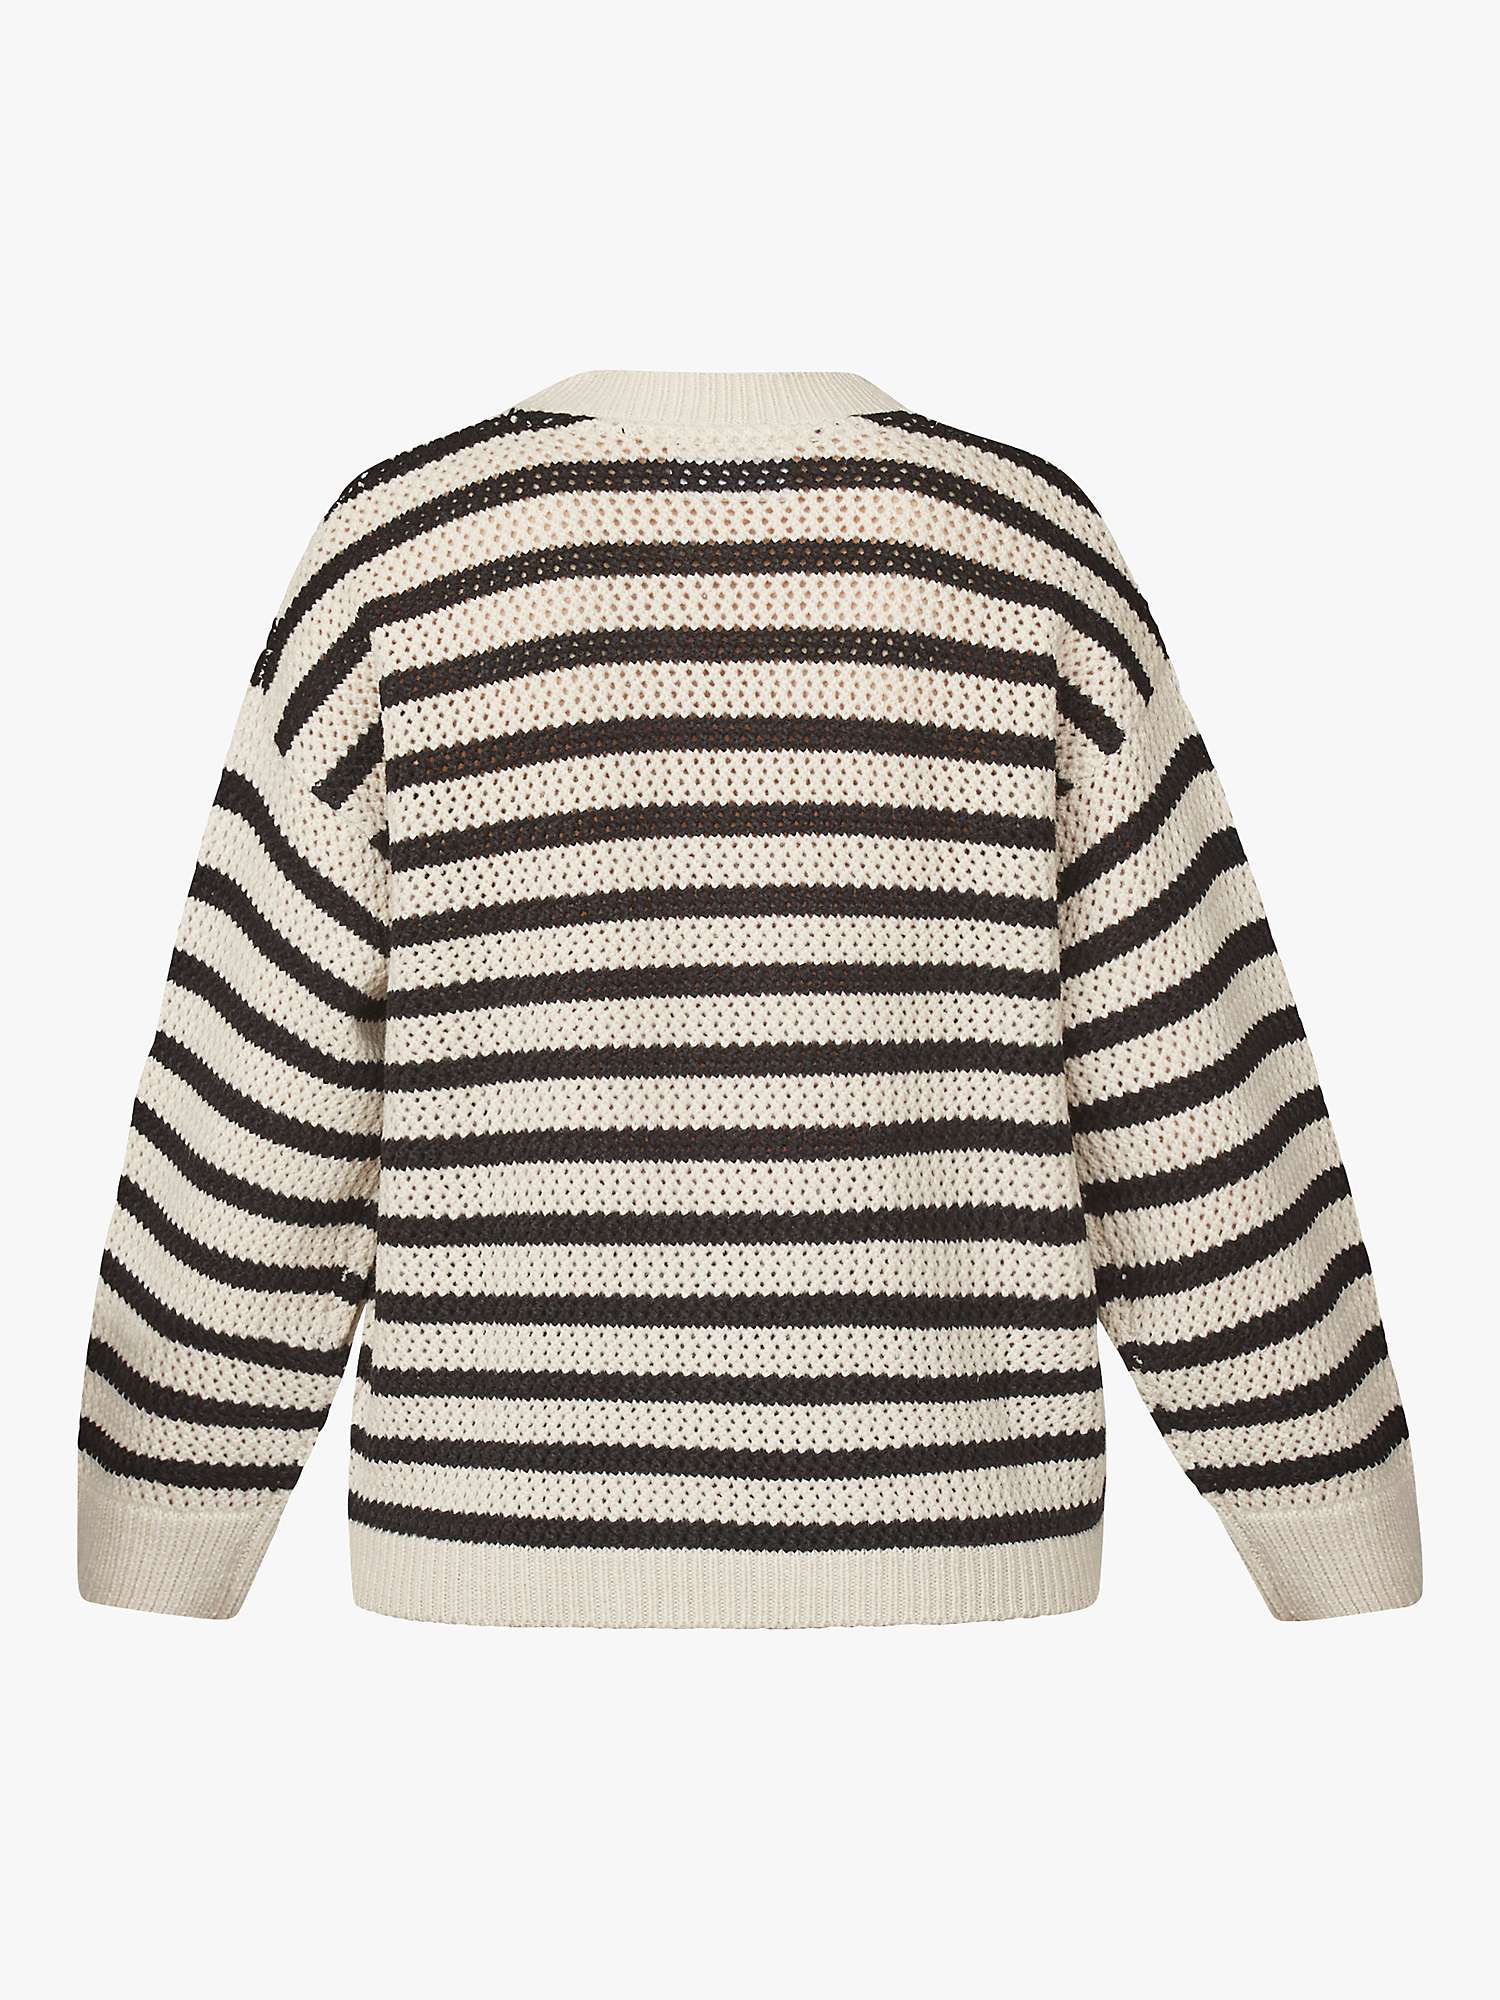 Buy Sisters Point Hava Open Knit Striped Cardigan, Bamboo/Black Online at johnlewis.com